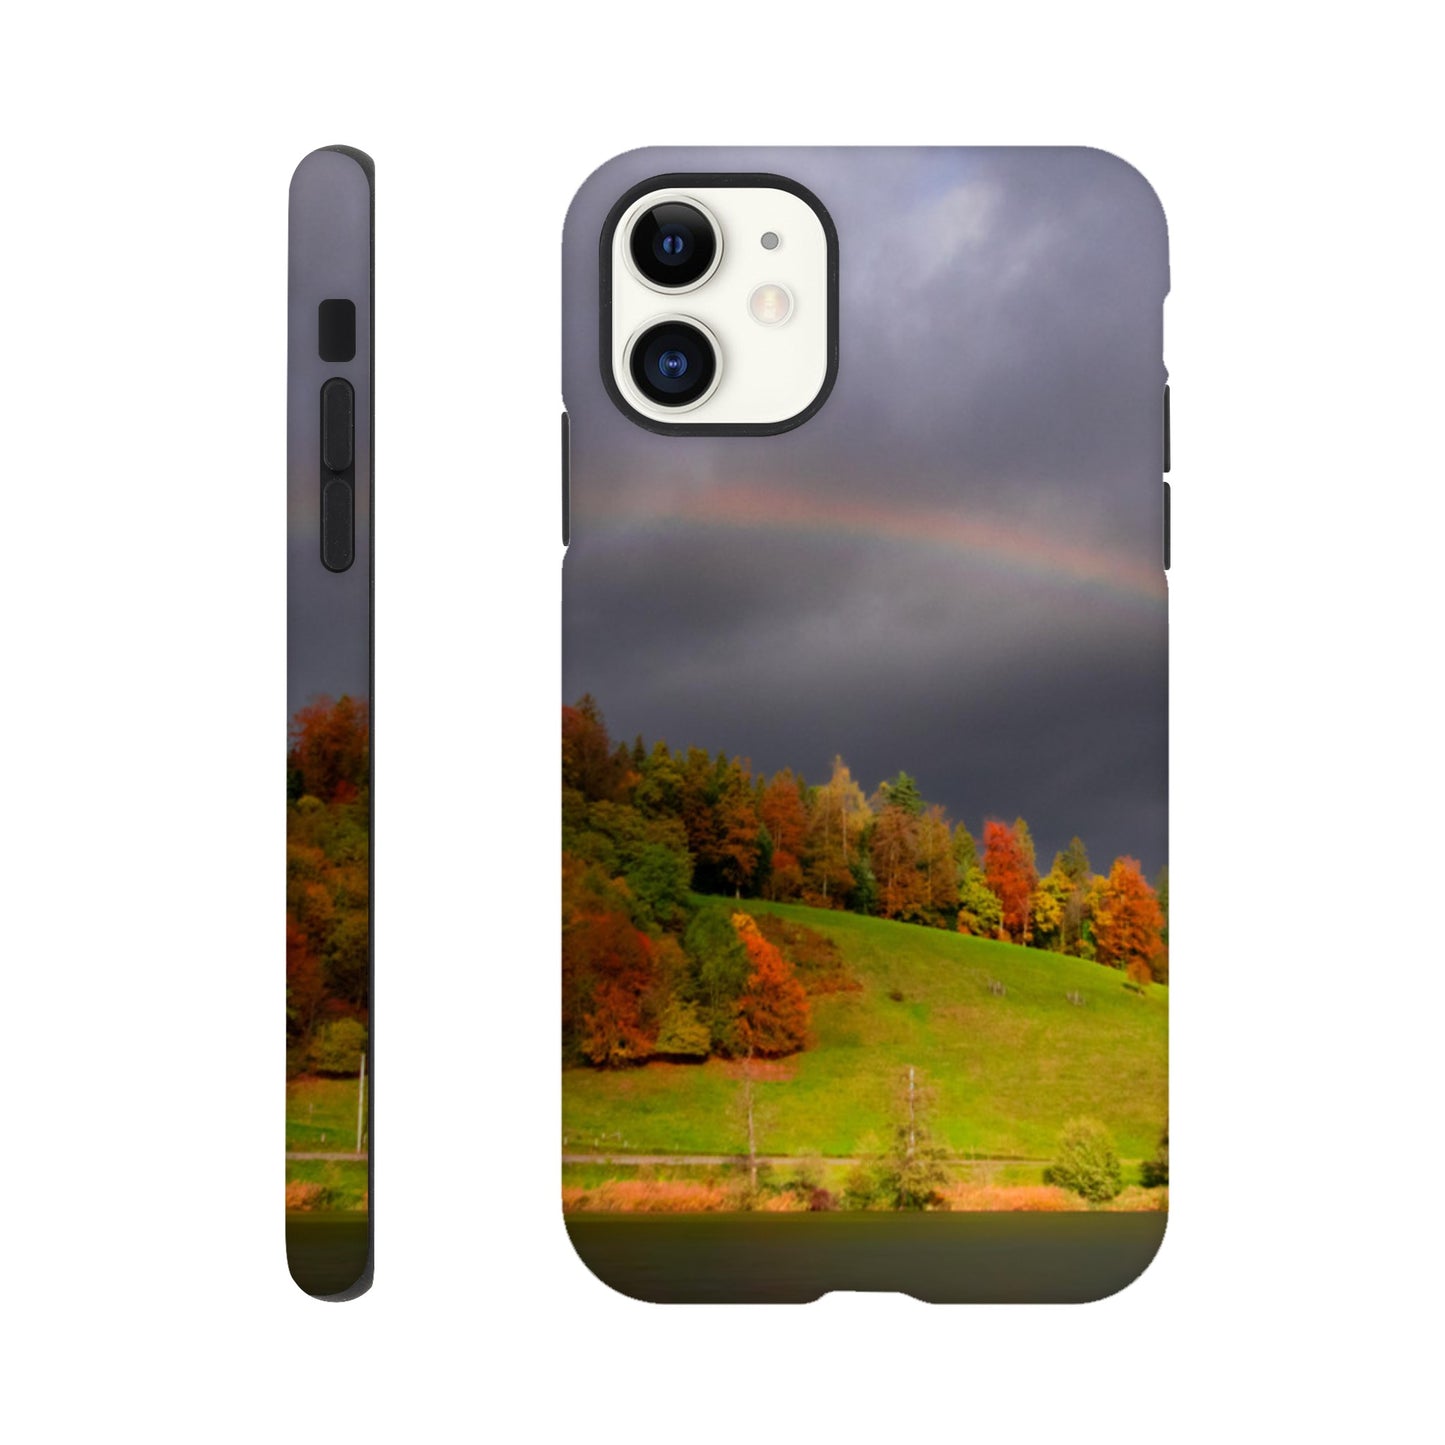 Rainbow motif hard case mobile phone case for iPhone and Samsung